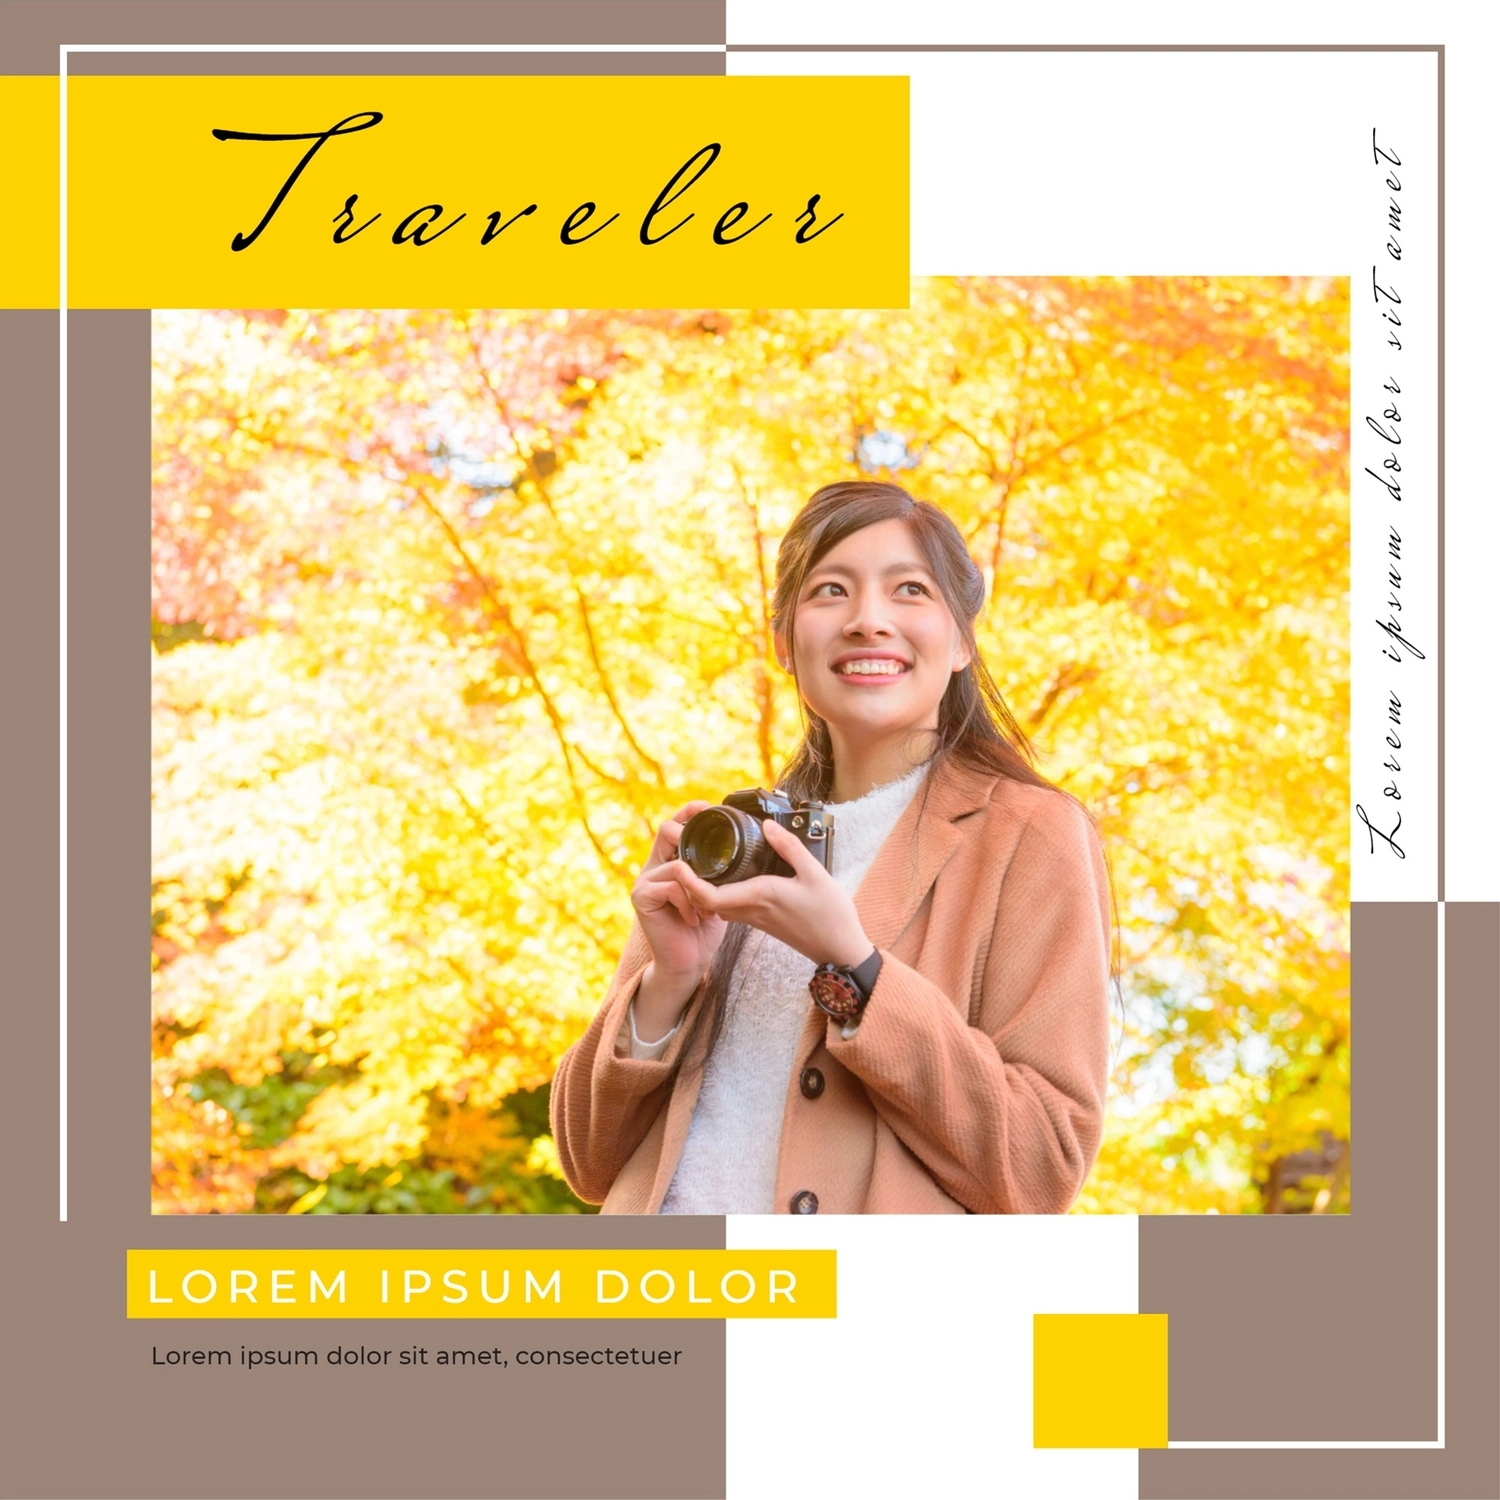 Instagram Post template 4104, adult, Fashionable, yellow, Instagram Post template